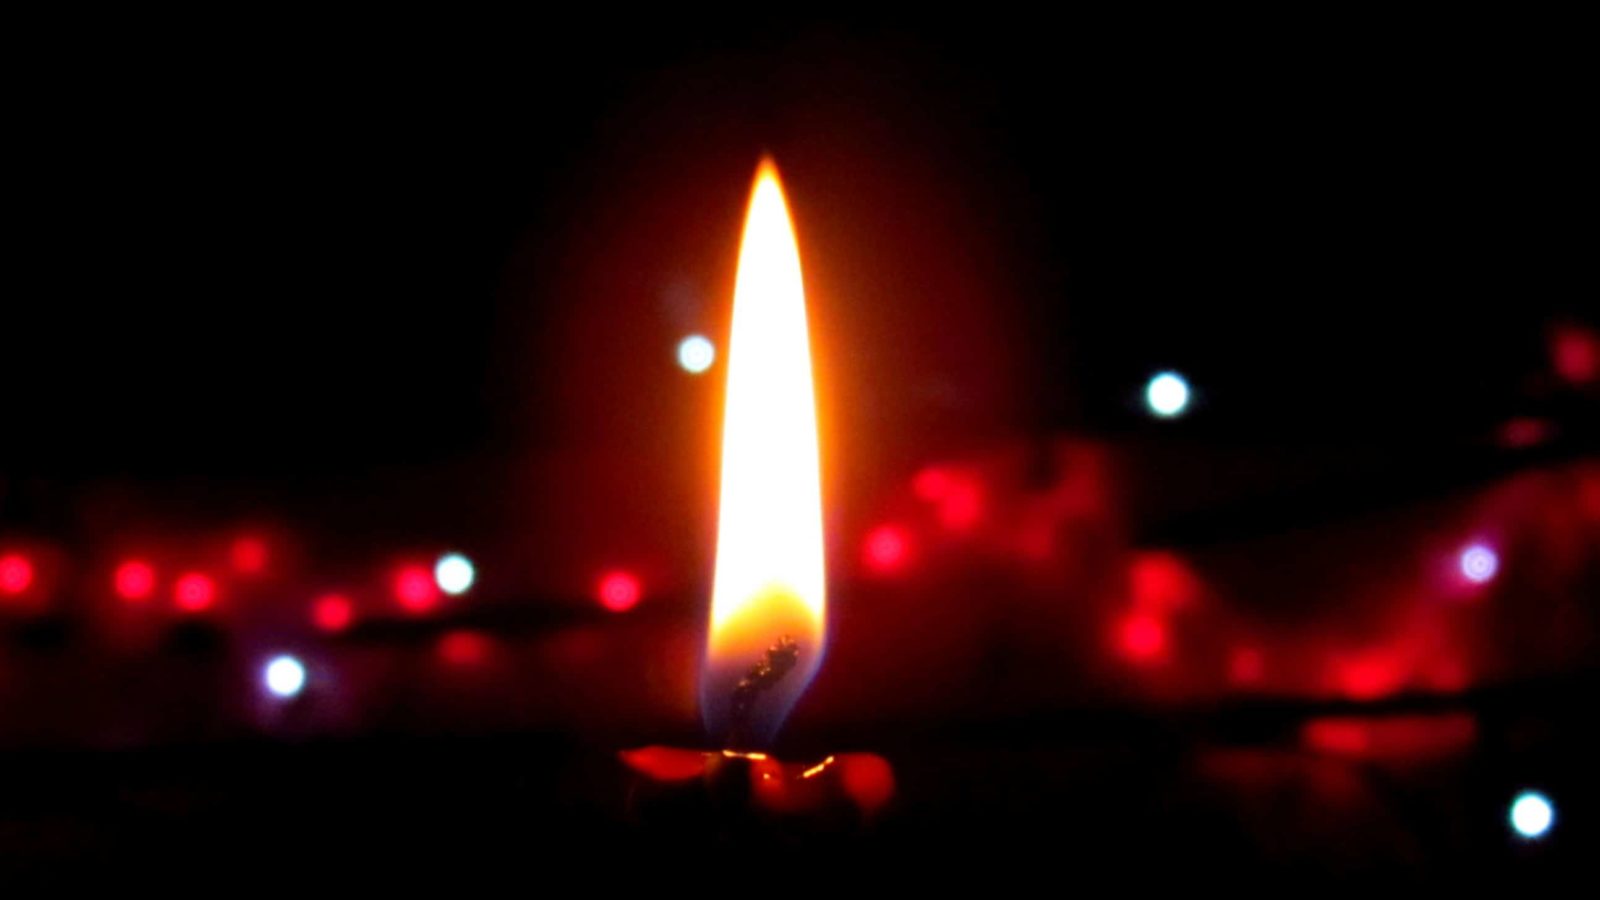 A candle burns in a dark room, touching off gleams of red.